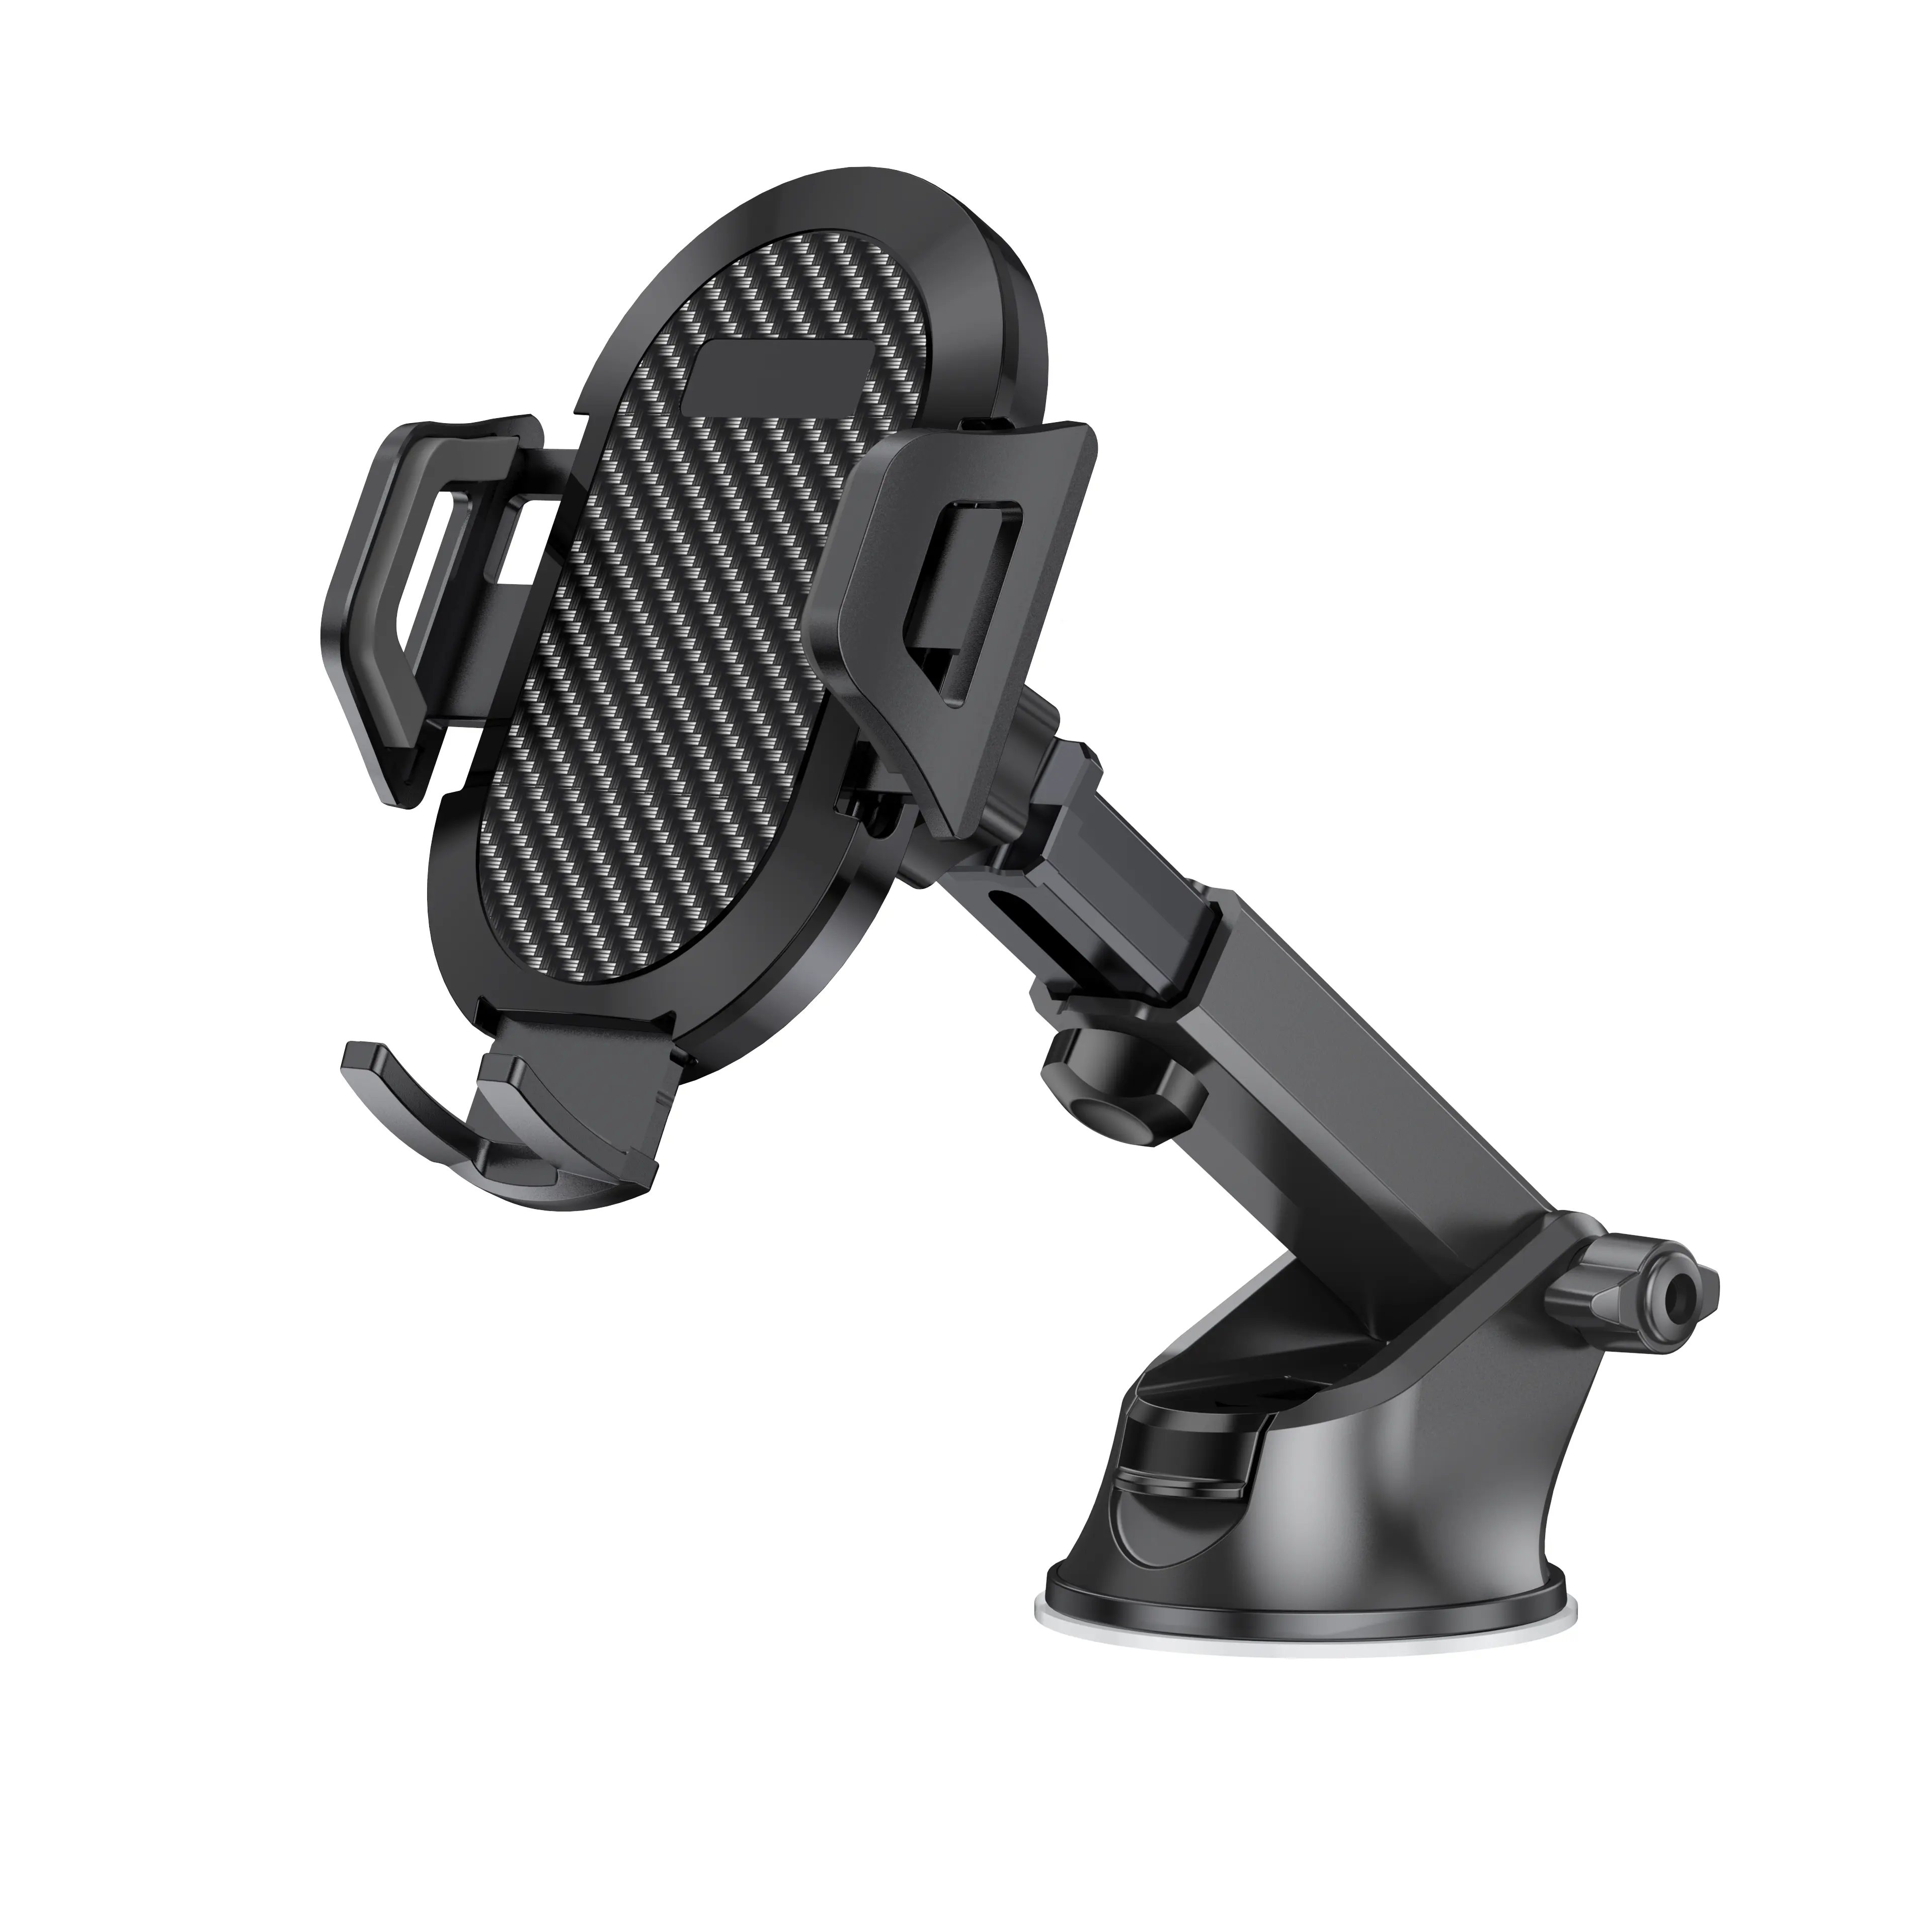 360 Degree Adjustment Mobile Phone Car Accessories For Cellphone OEM LOGO Smart Car Phone Holder With Suction Cup